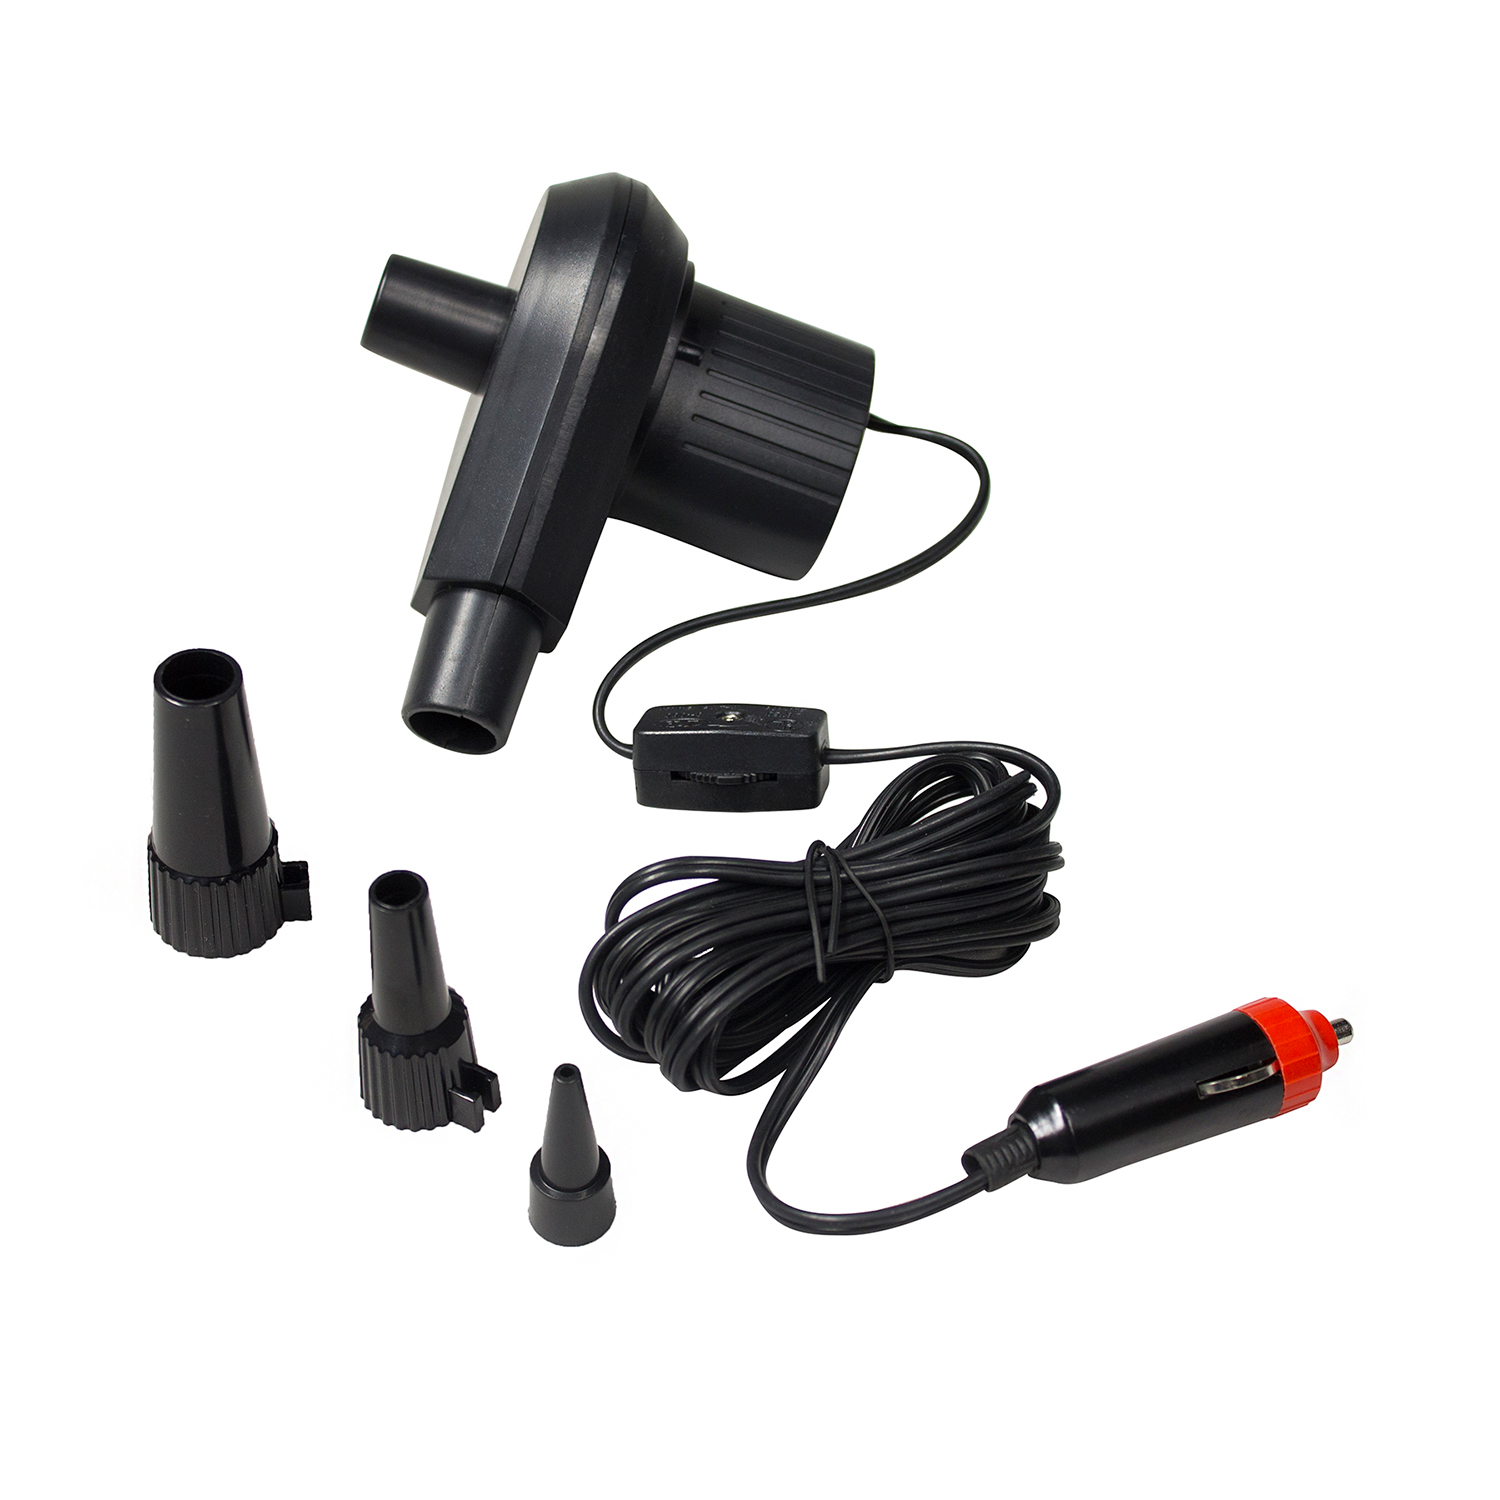 World Famous - Mini air pump with 12V adaptor